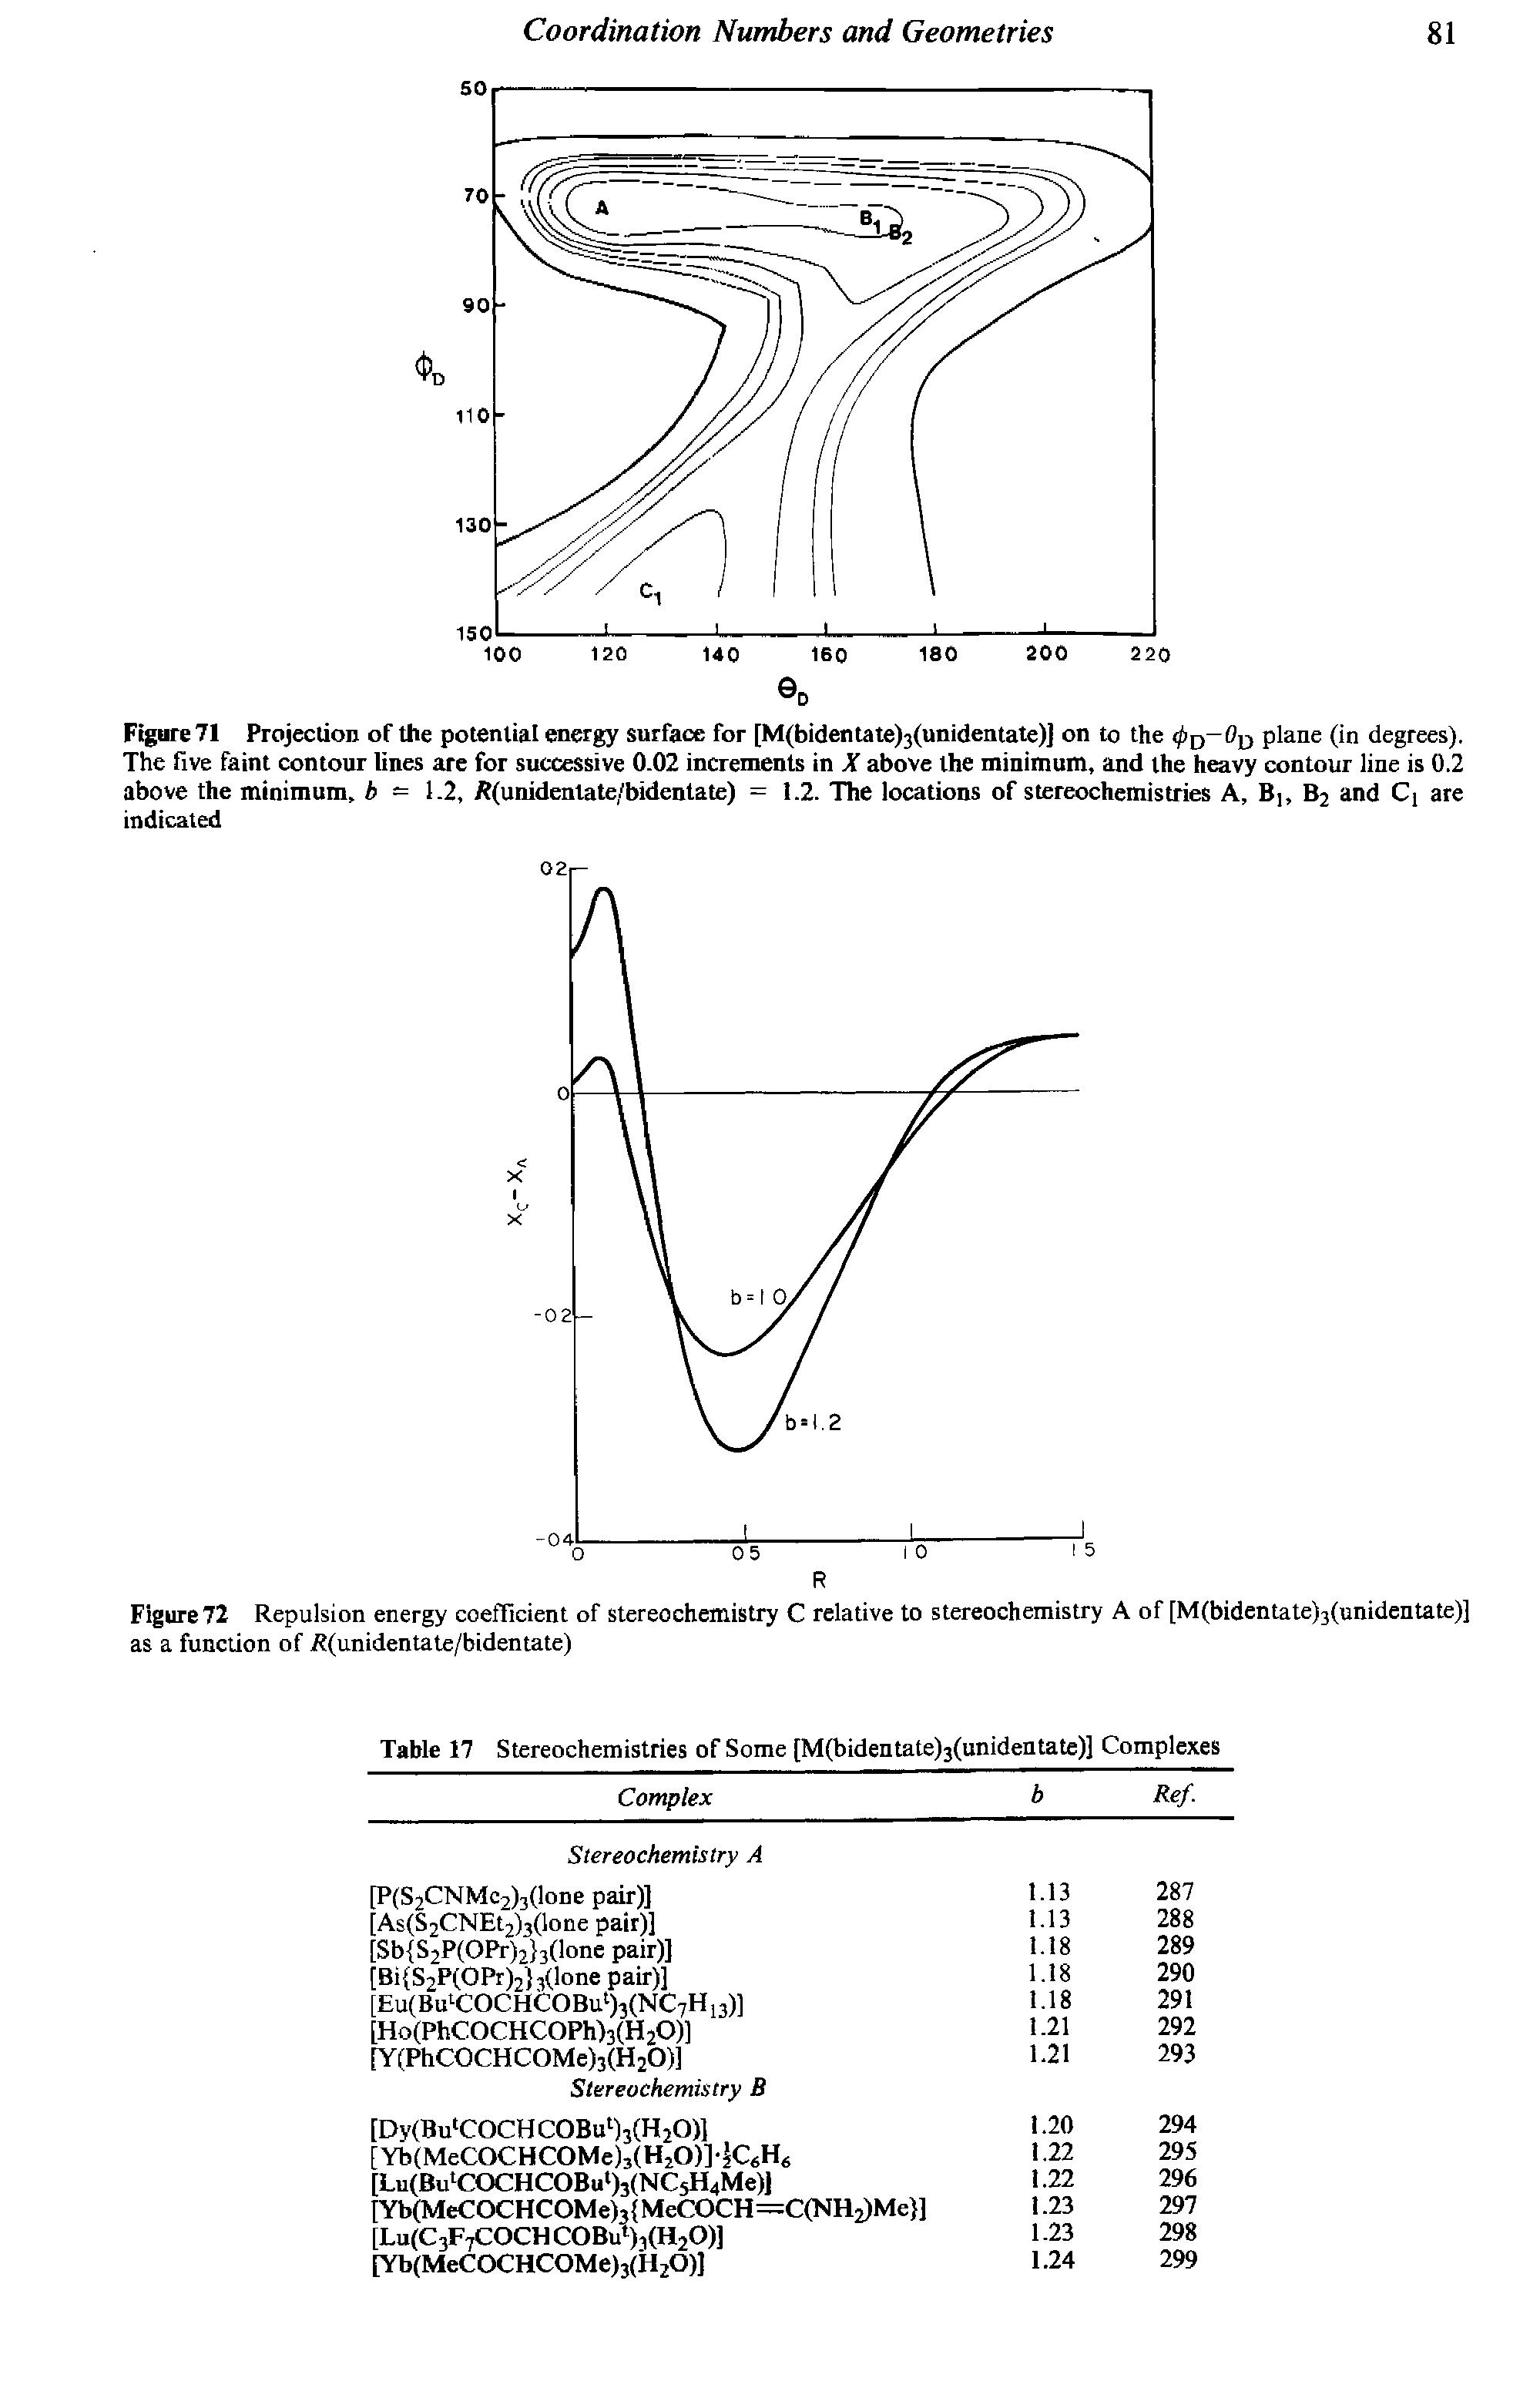 Figure 72 Repulsion energy coefficient of stereochemistry C relative to stereochemistry A of [M(bidentate)3(unidentate)] as a function of 7 (unidentate/bidentate)...